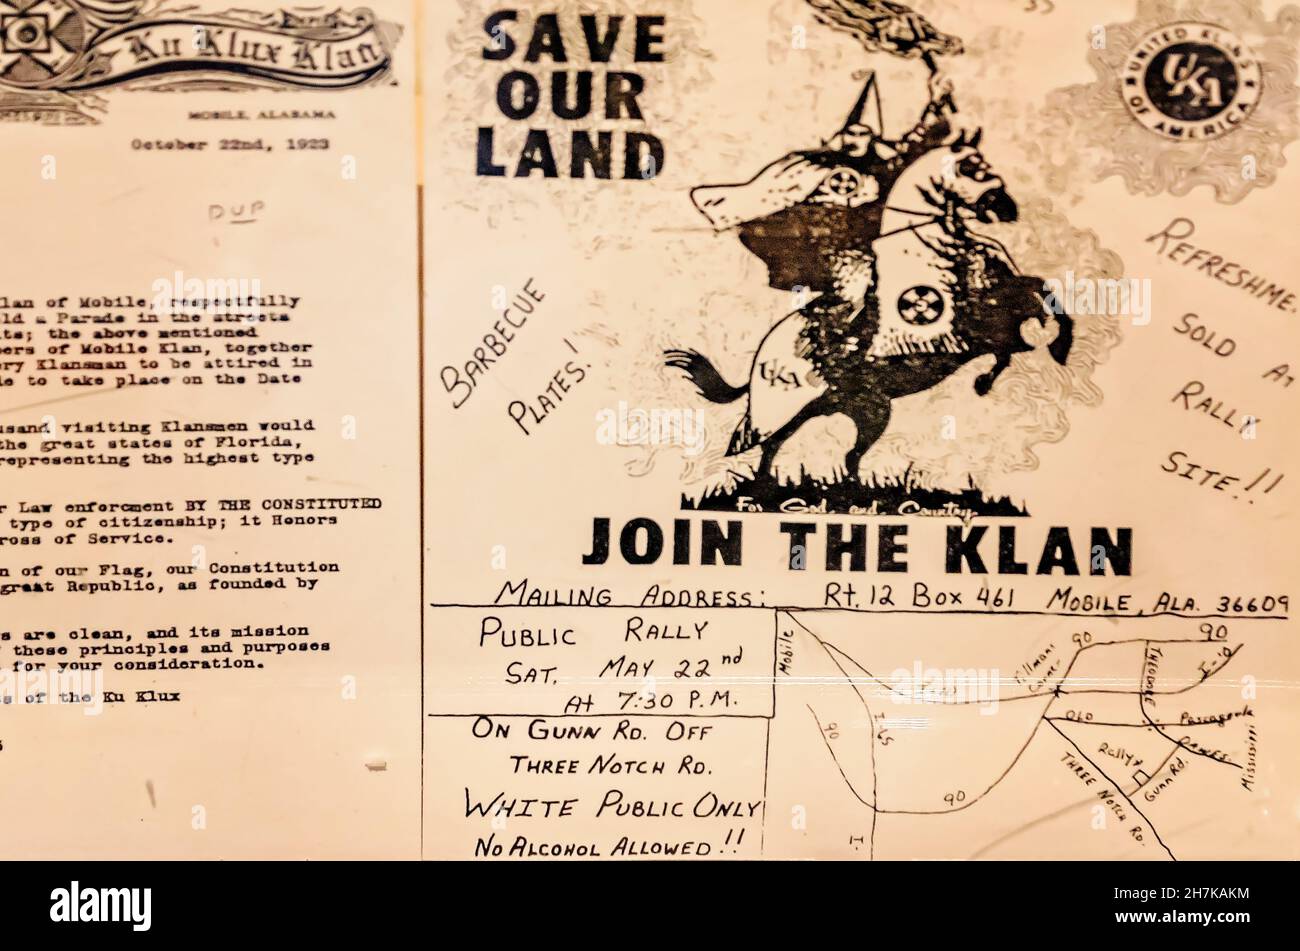 A poster for a Ku Klux Klan rally is displayed alongside a Klan parade permit request at the History Museum of Mobile in Mobile, Alabama. Stock Photo